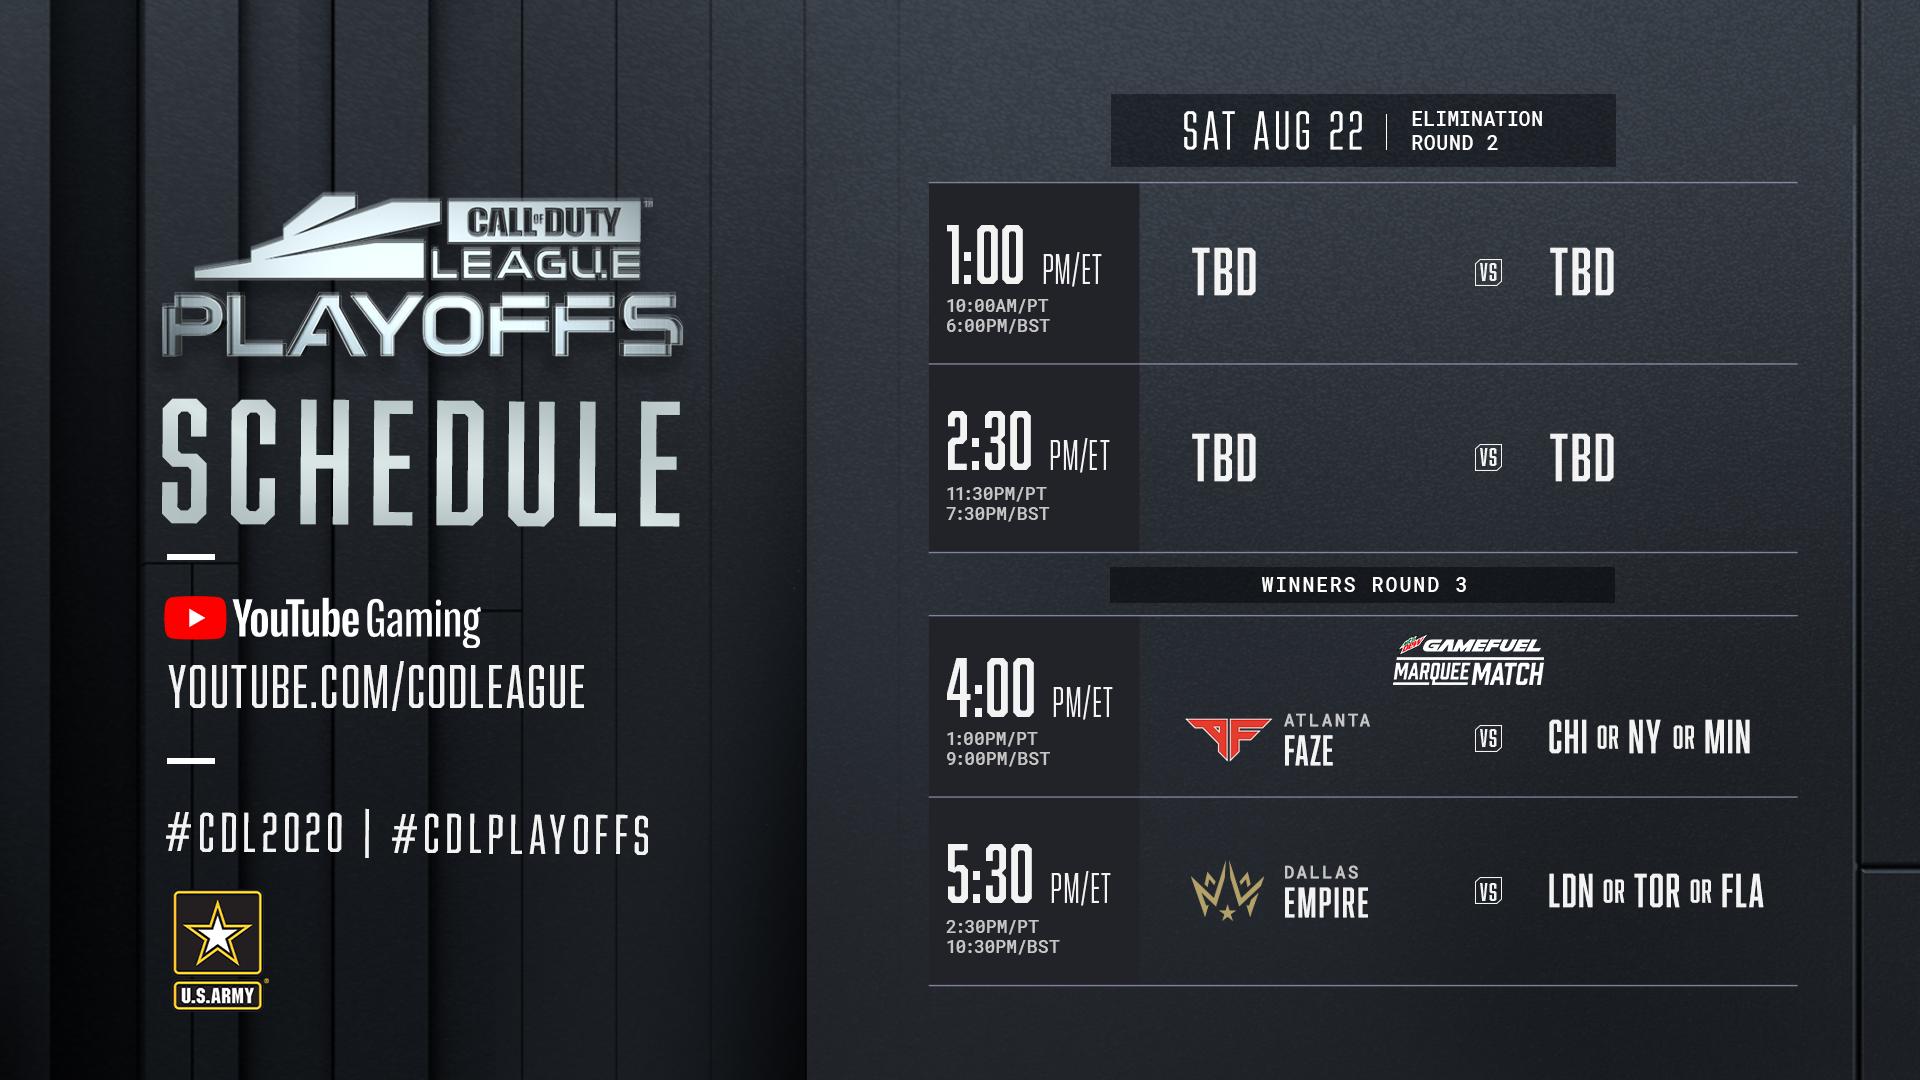 Full match schedule announced for 4.6 million CDL Playoffs & Champs